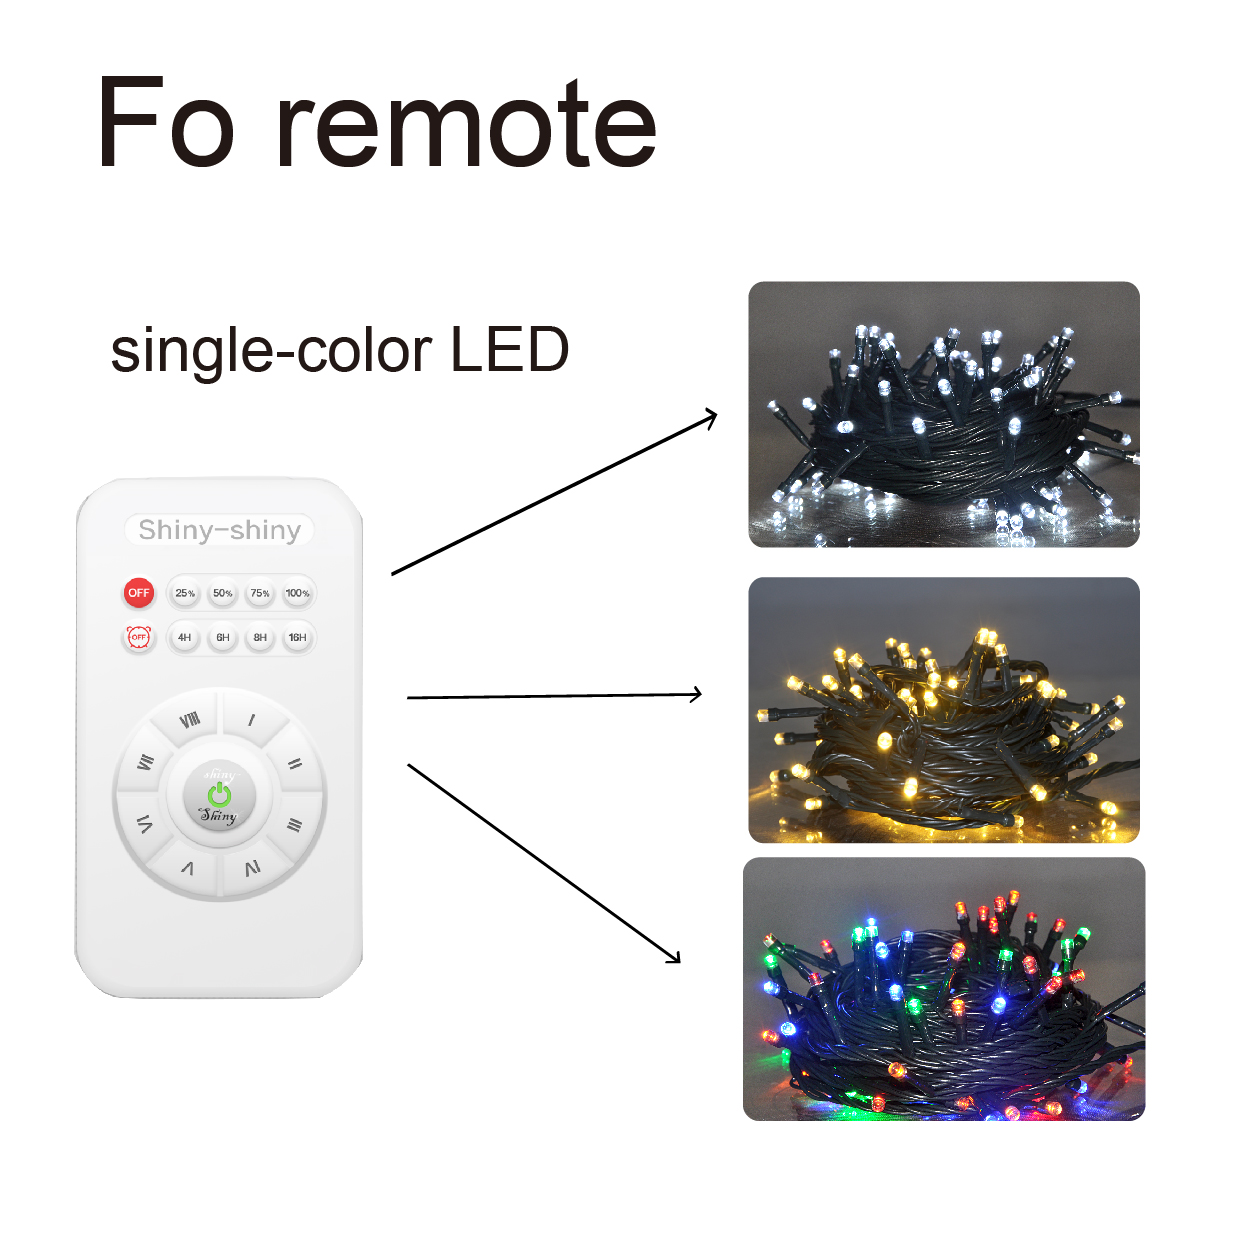 What are the related introductions of led light string Christmas tree?